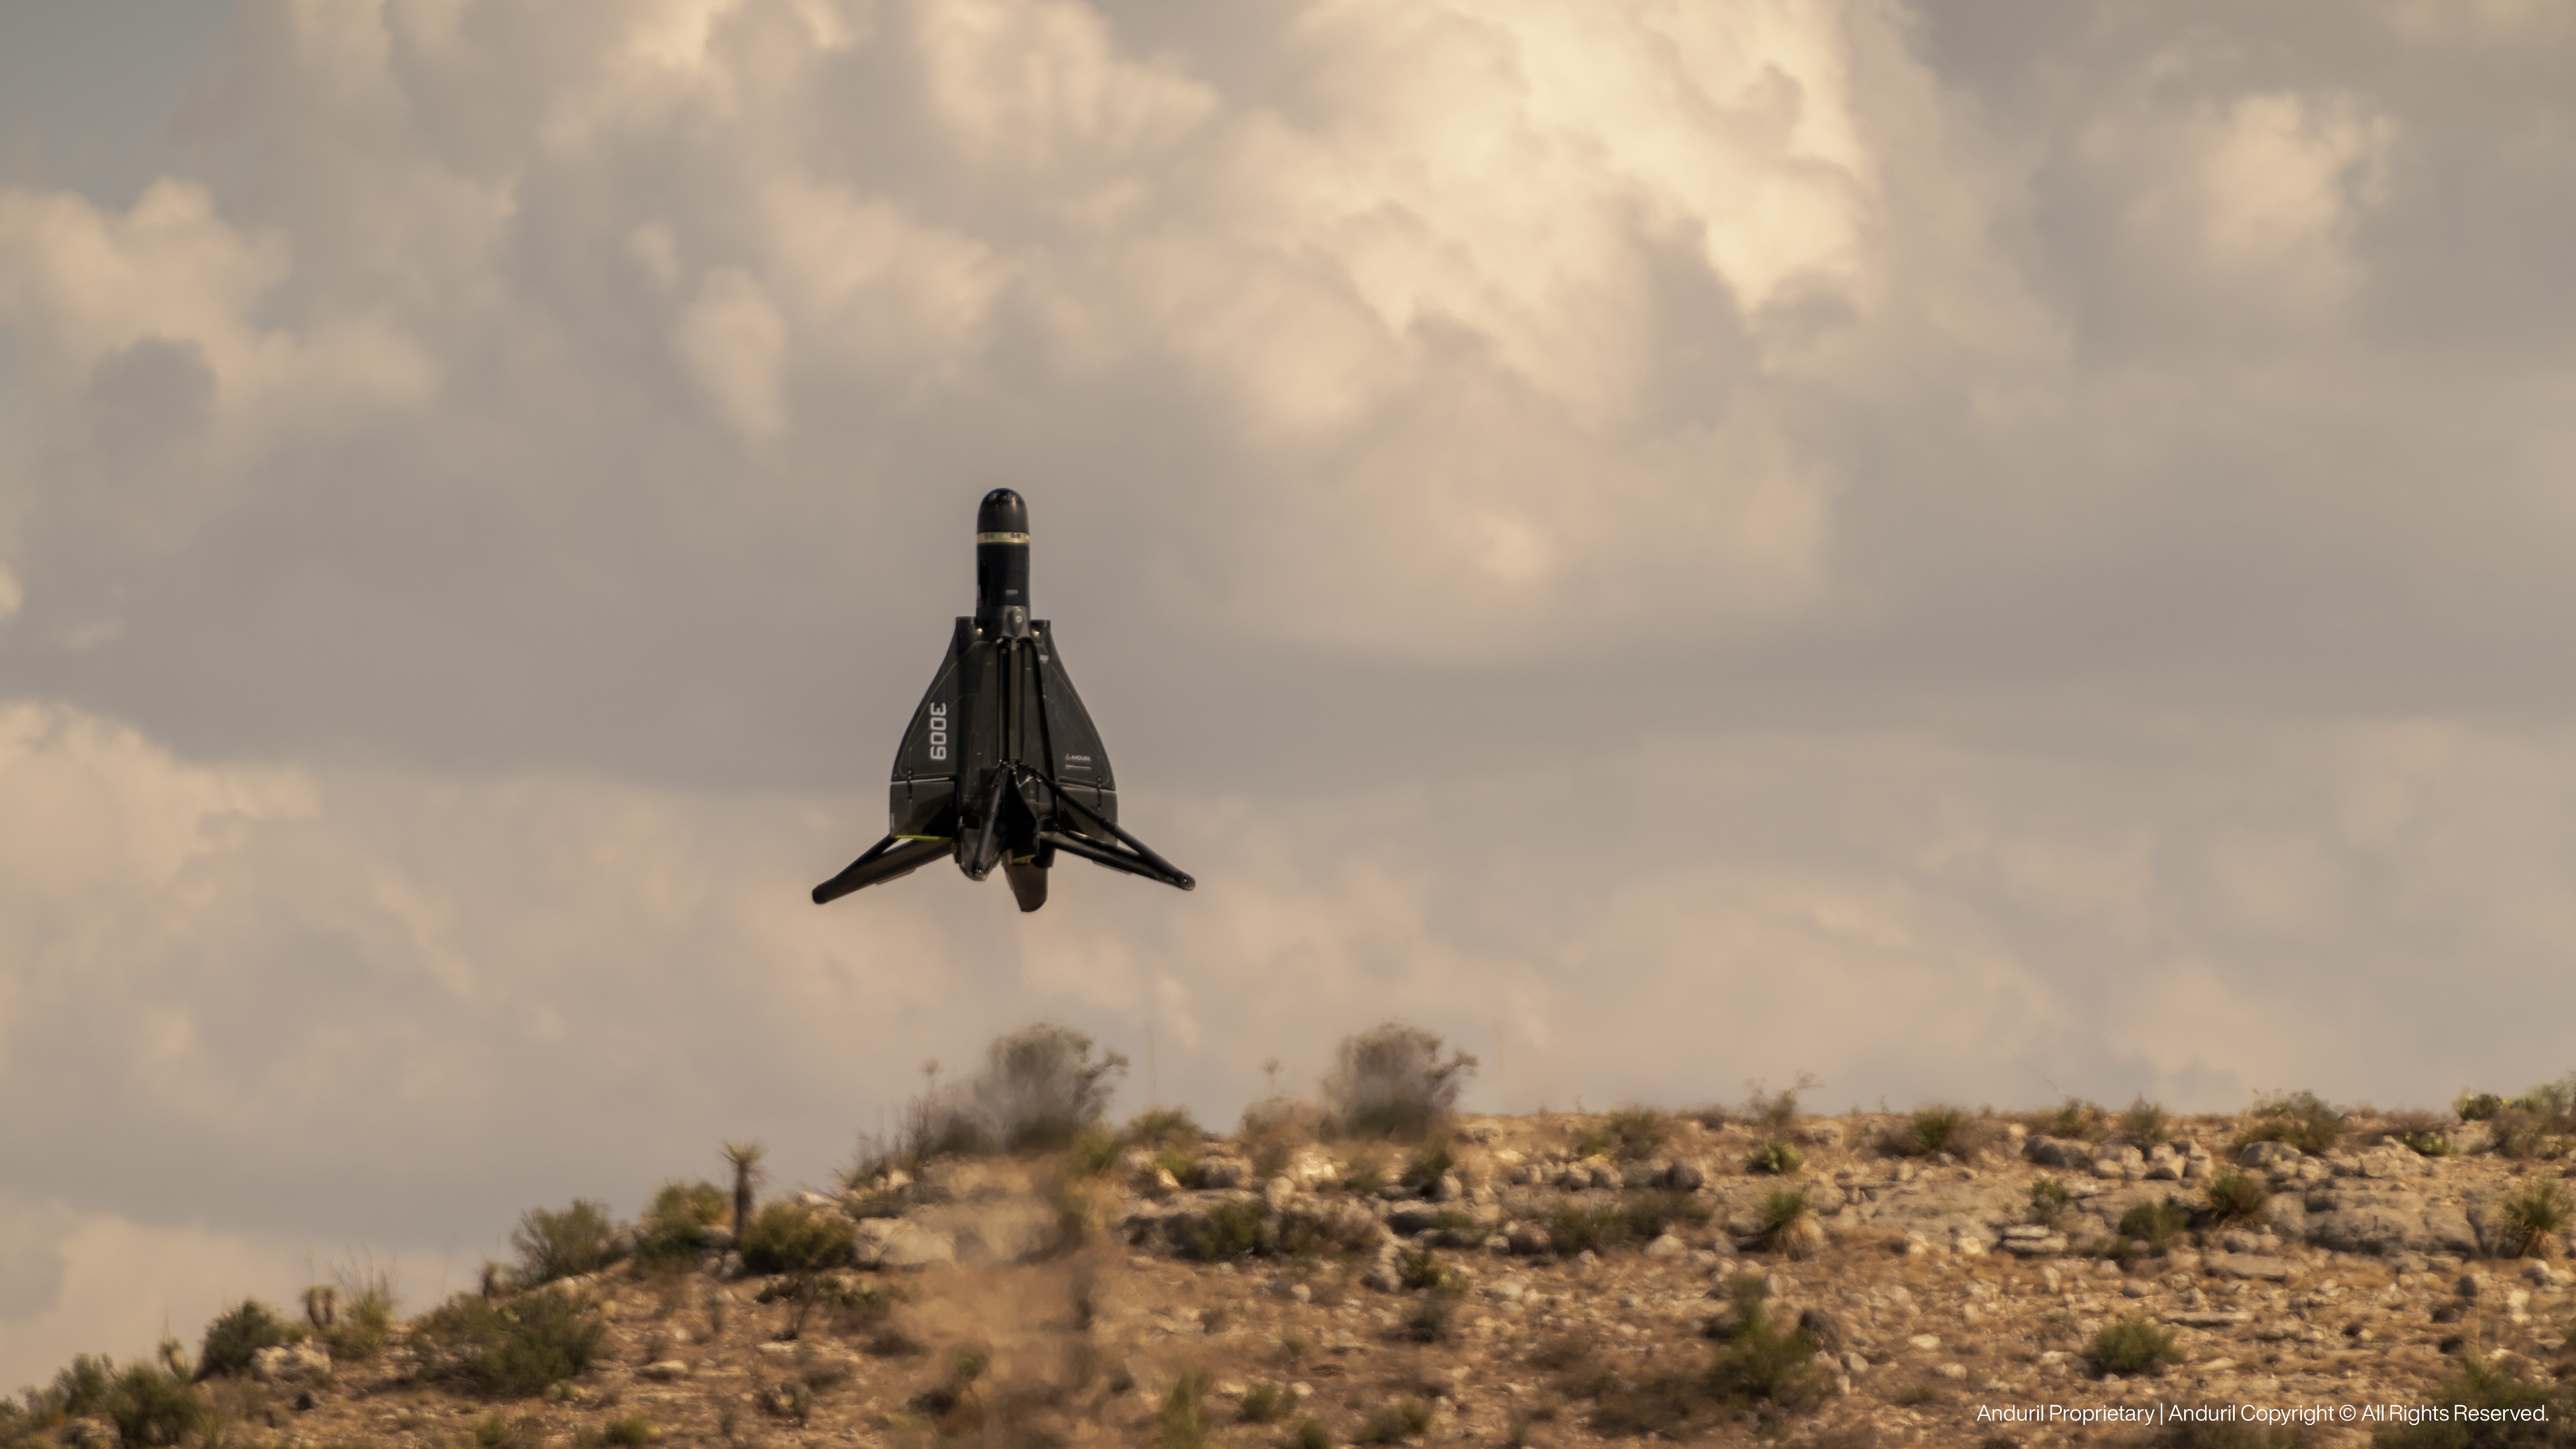 Anduril unveils Roadrunner, “a fighter jet weapon that lands like a Falcon 9”